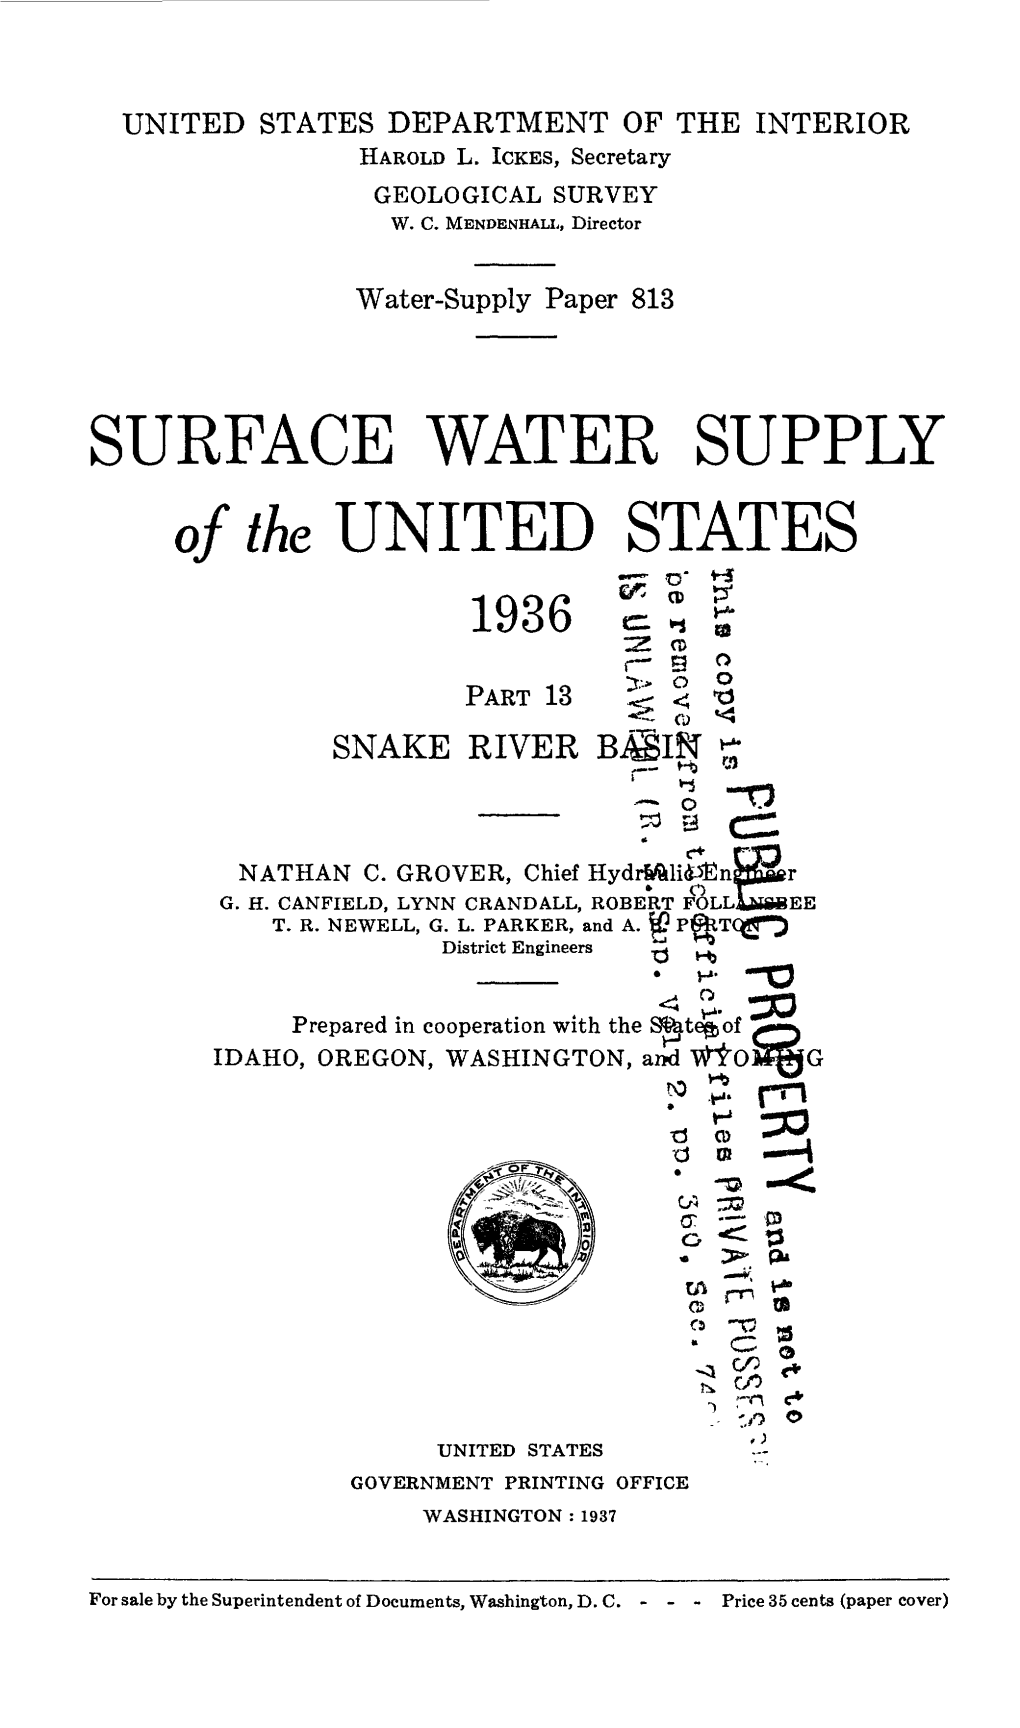 SURFACE WATER SUPPLY of the UNITED STATES